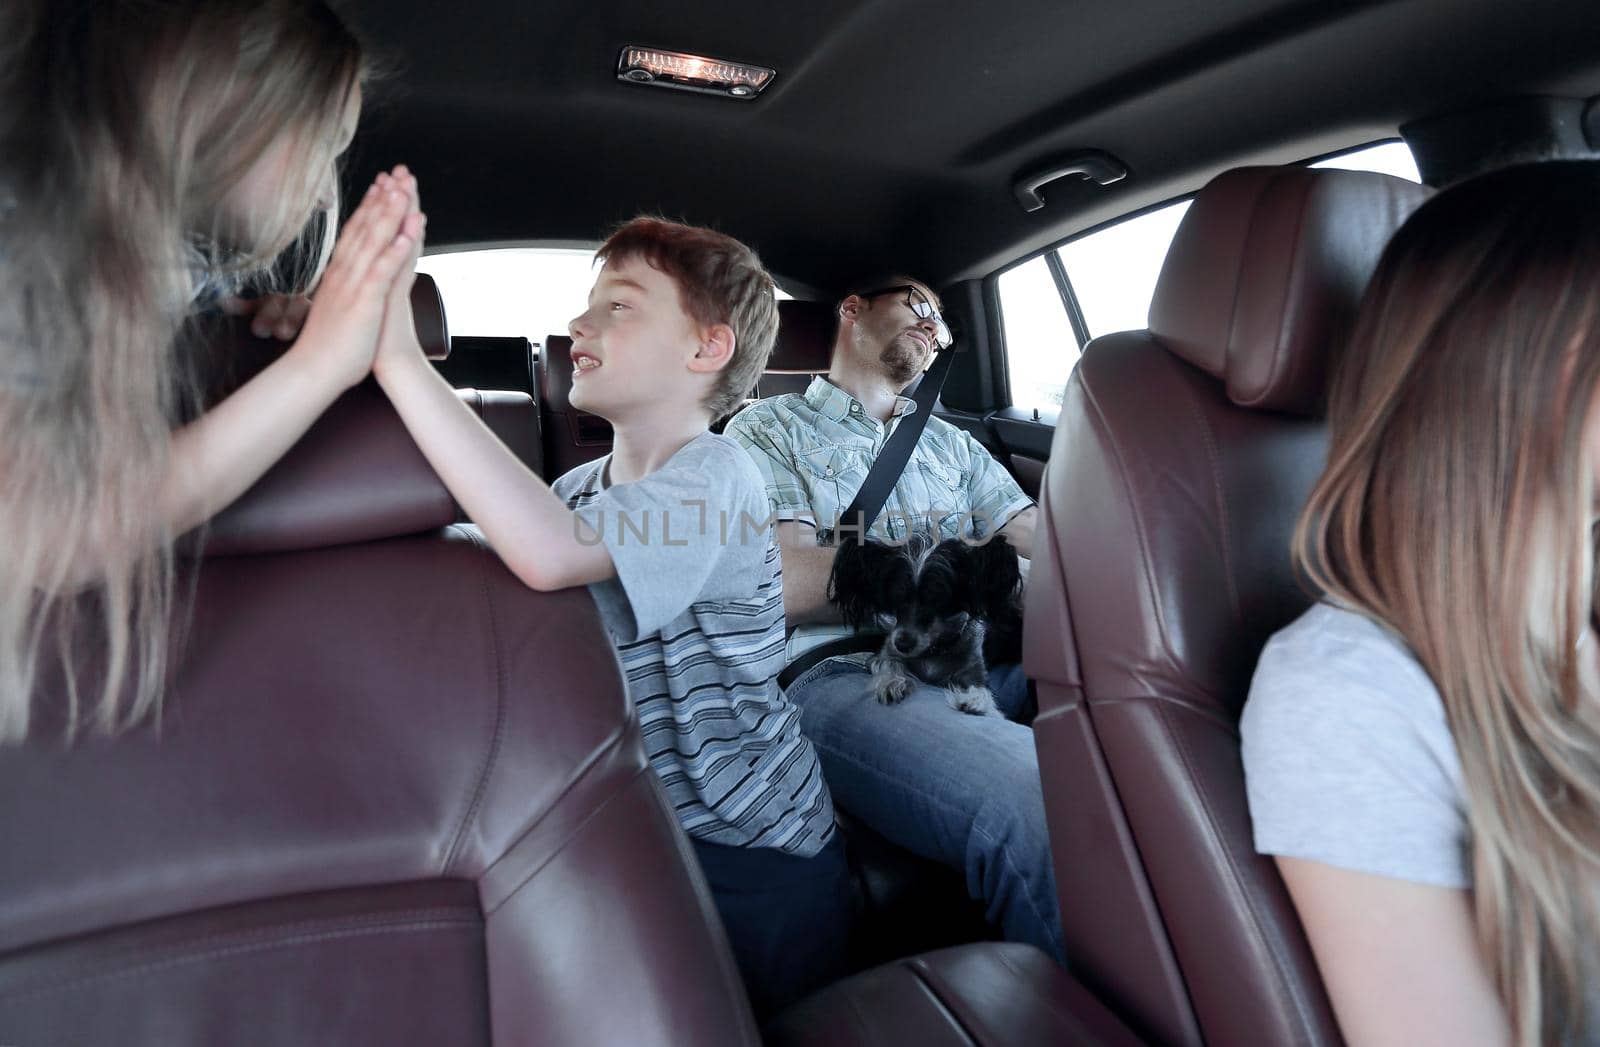 brother and sister give a high five while sitting in the car cabin.family holiday concept